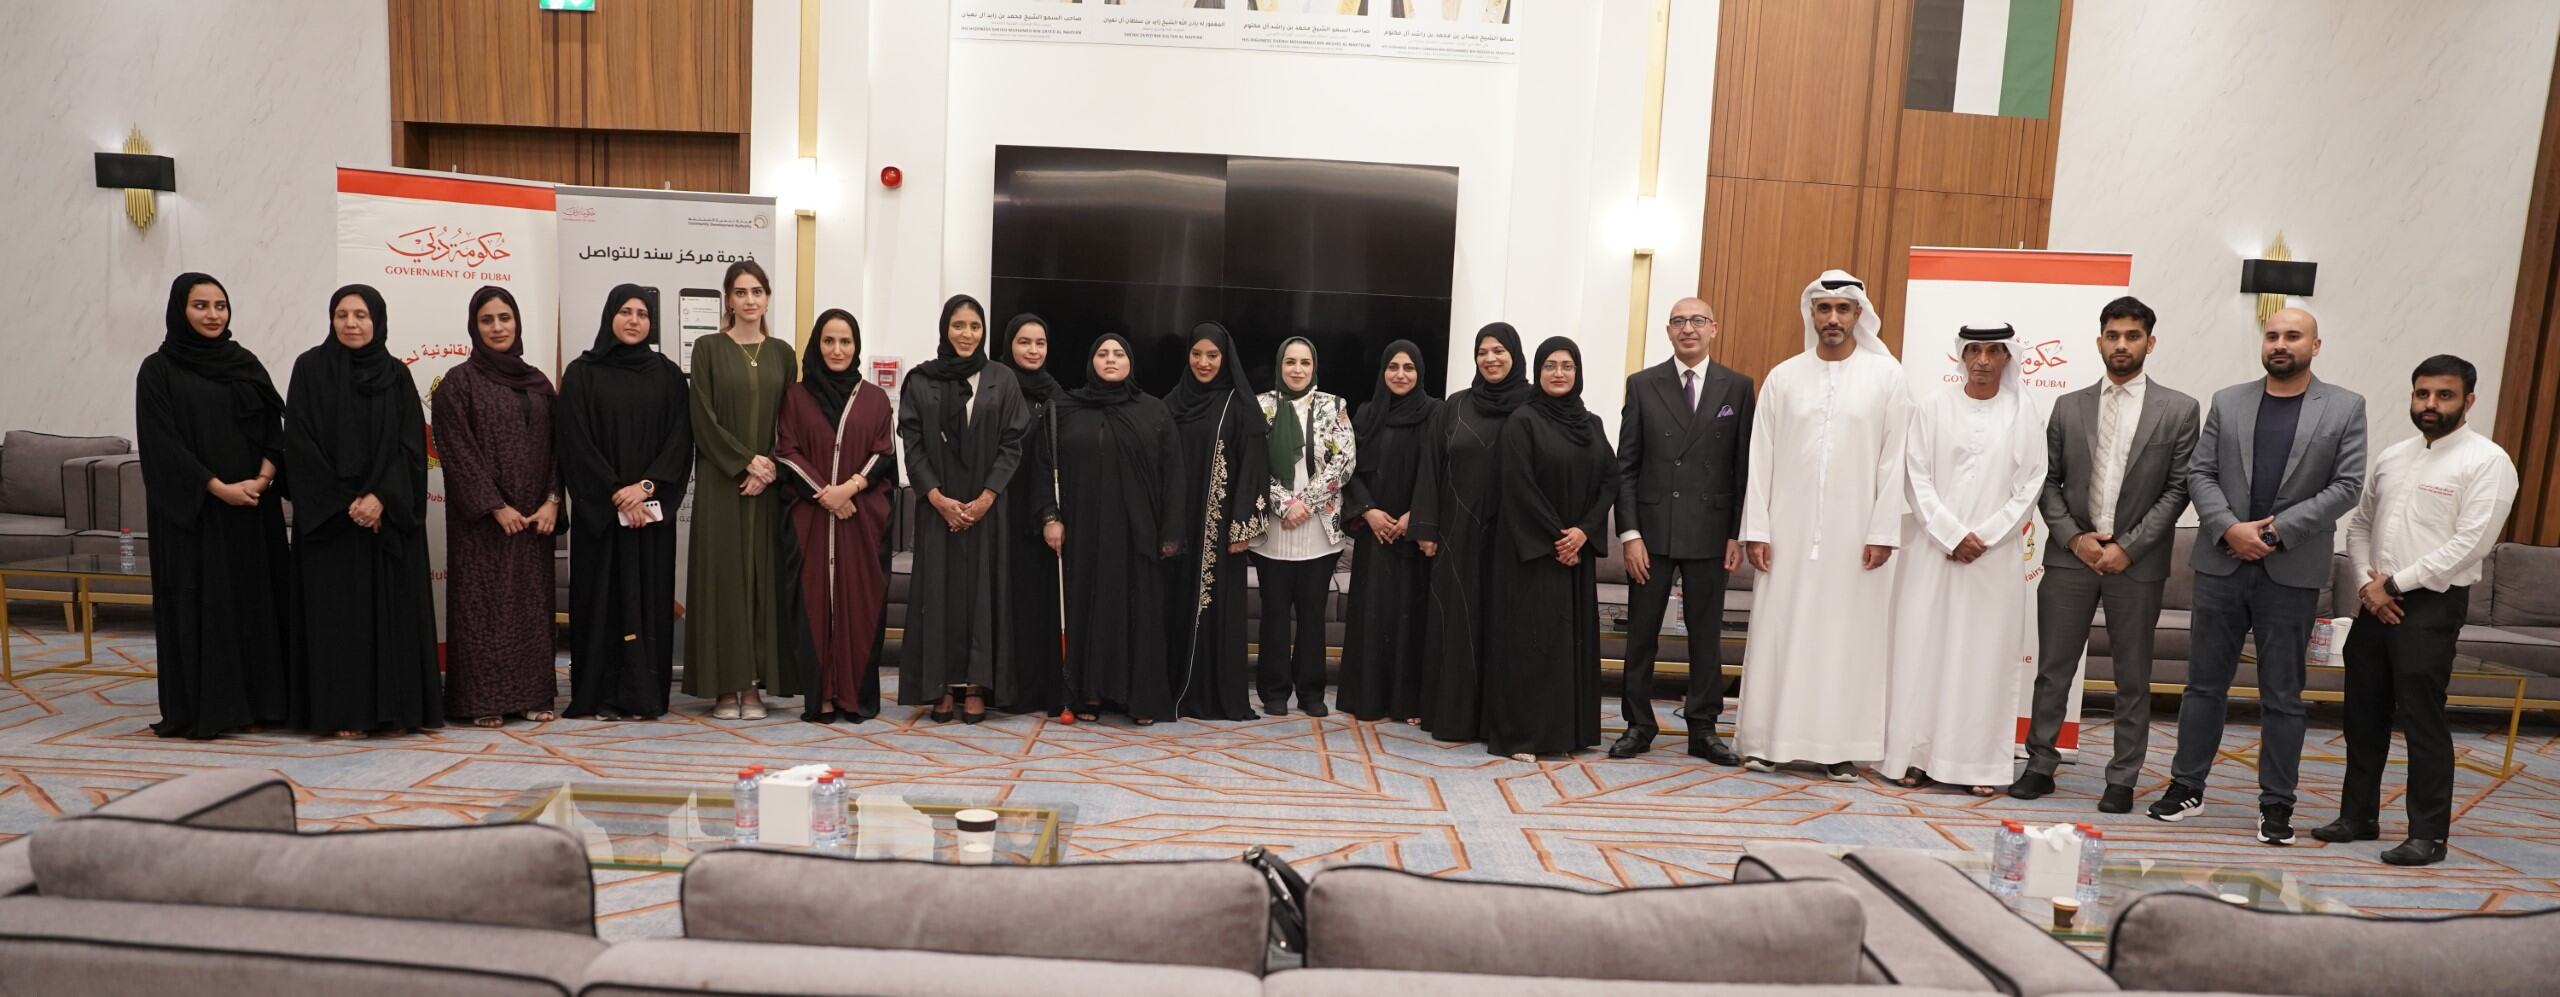 As part of its Initiative “With You with Determination” Legal Affairs Department holds a Workshop on Rights of People of Determination in UAE Legislation and International Agreements